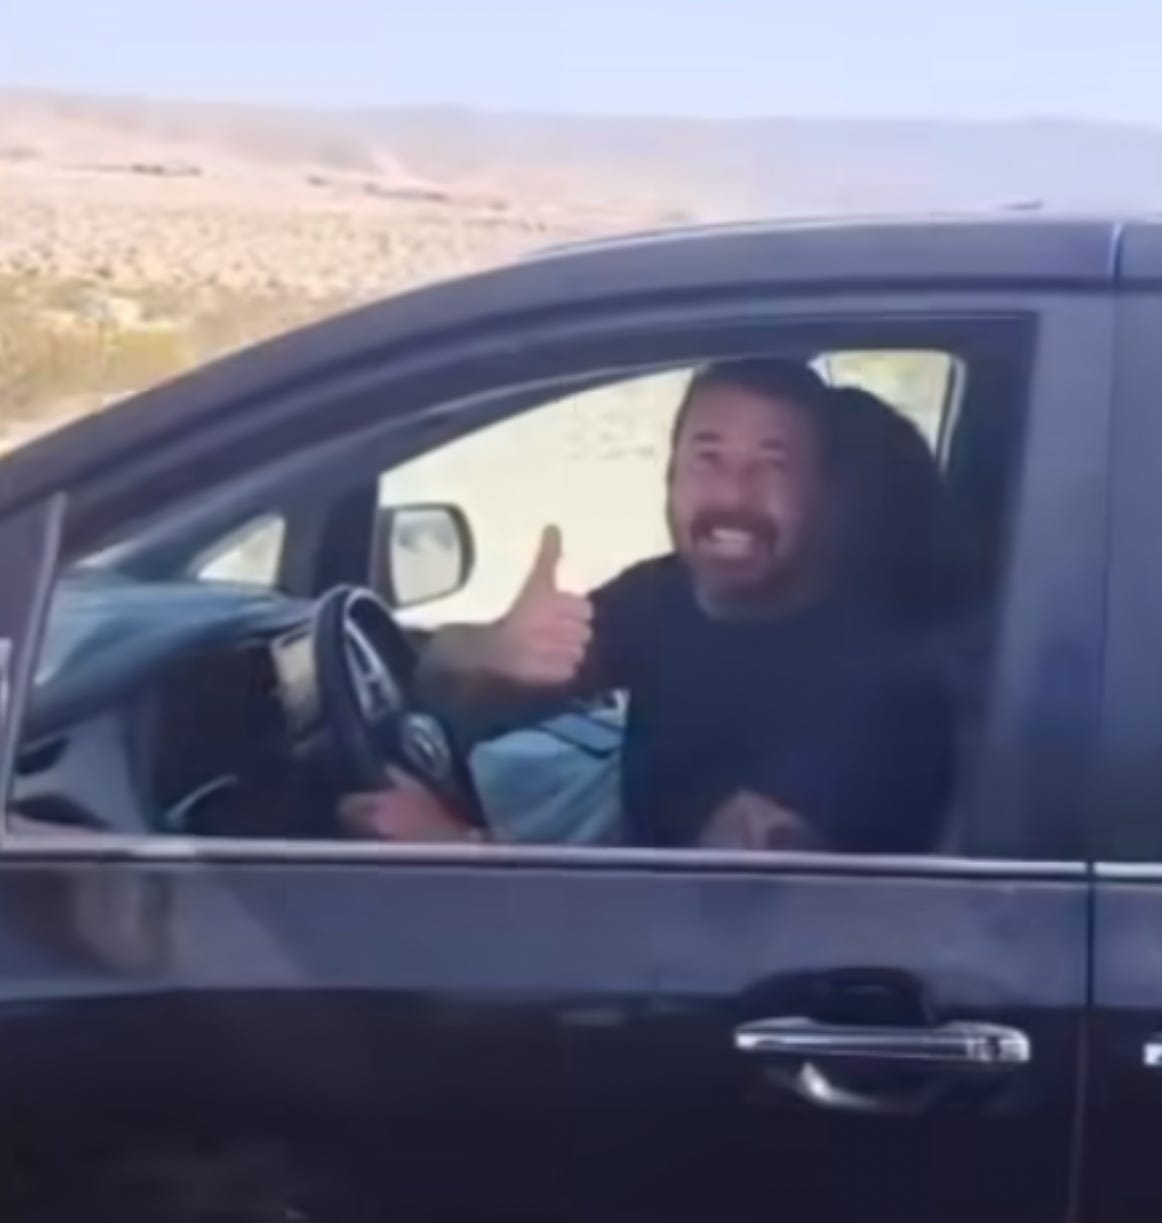 Dave Grohl giving the thumbs up from his Honda Odyssey in the desert